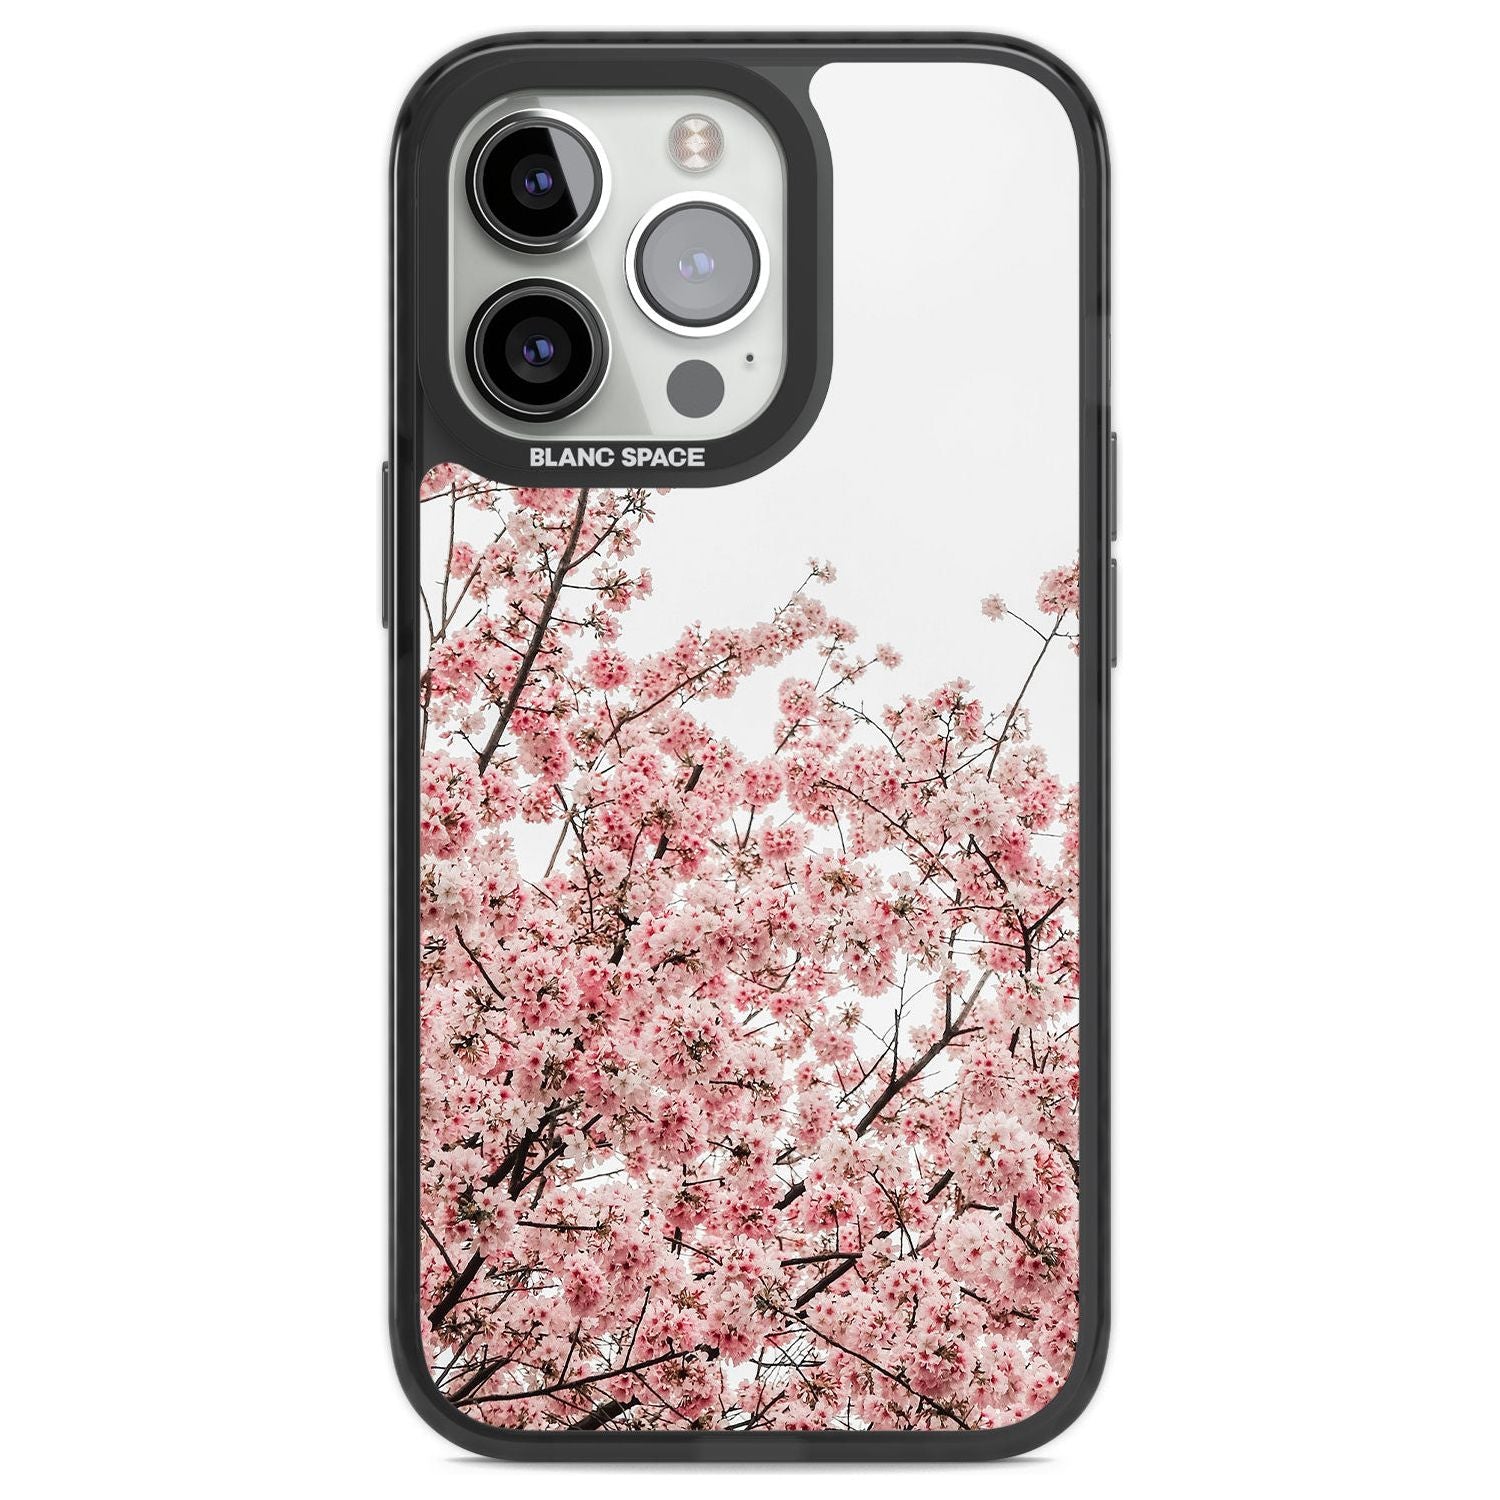 Cherry Blossoms - Real Floral Photographs Phone Case iPhone 13 Pro / Black Impact Case,iPhone 14 Pro / Black Impact Case,iPhone 15 Pro Max / Black Impact Case,iPhone 15 Pro / Black Impact Case Blanc Space